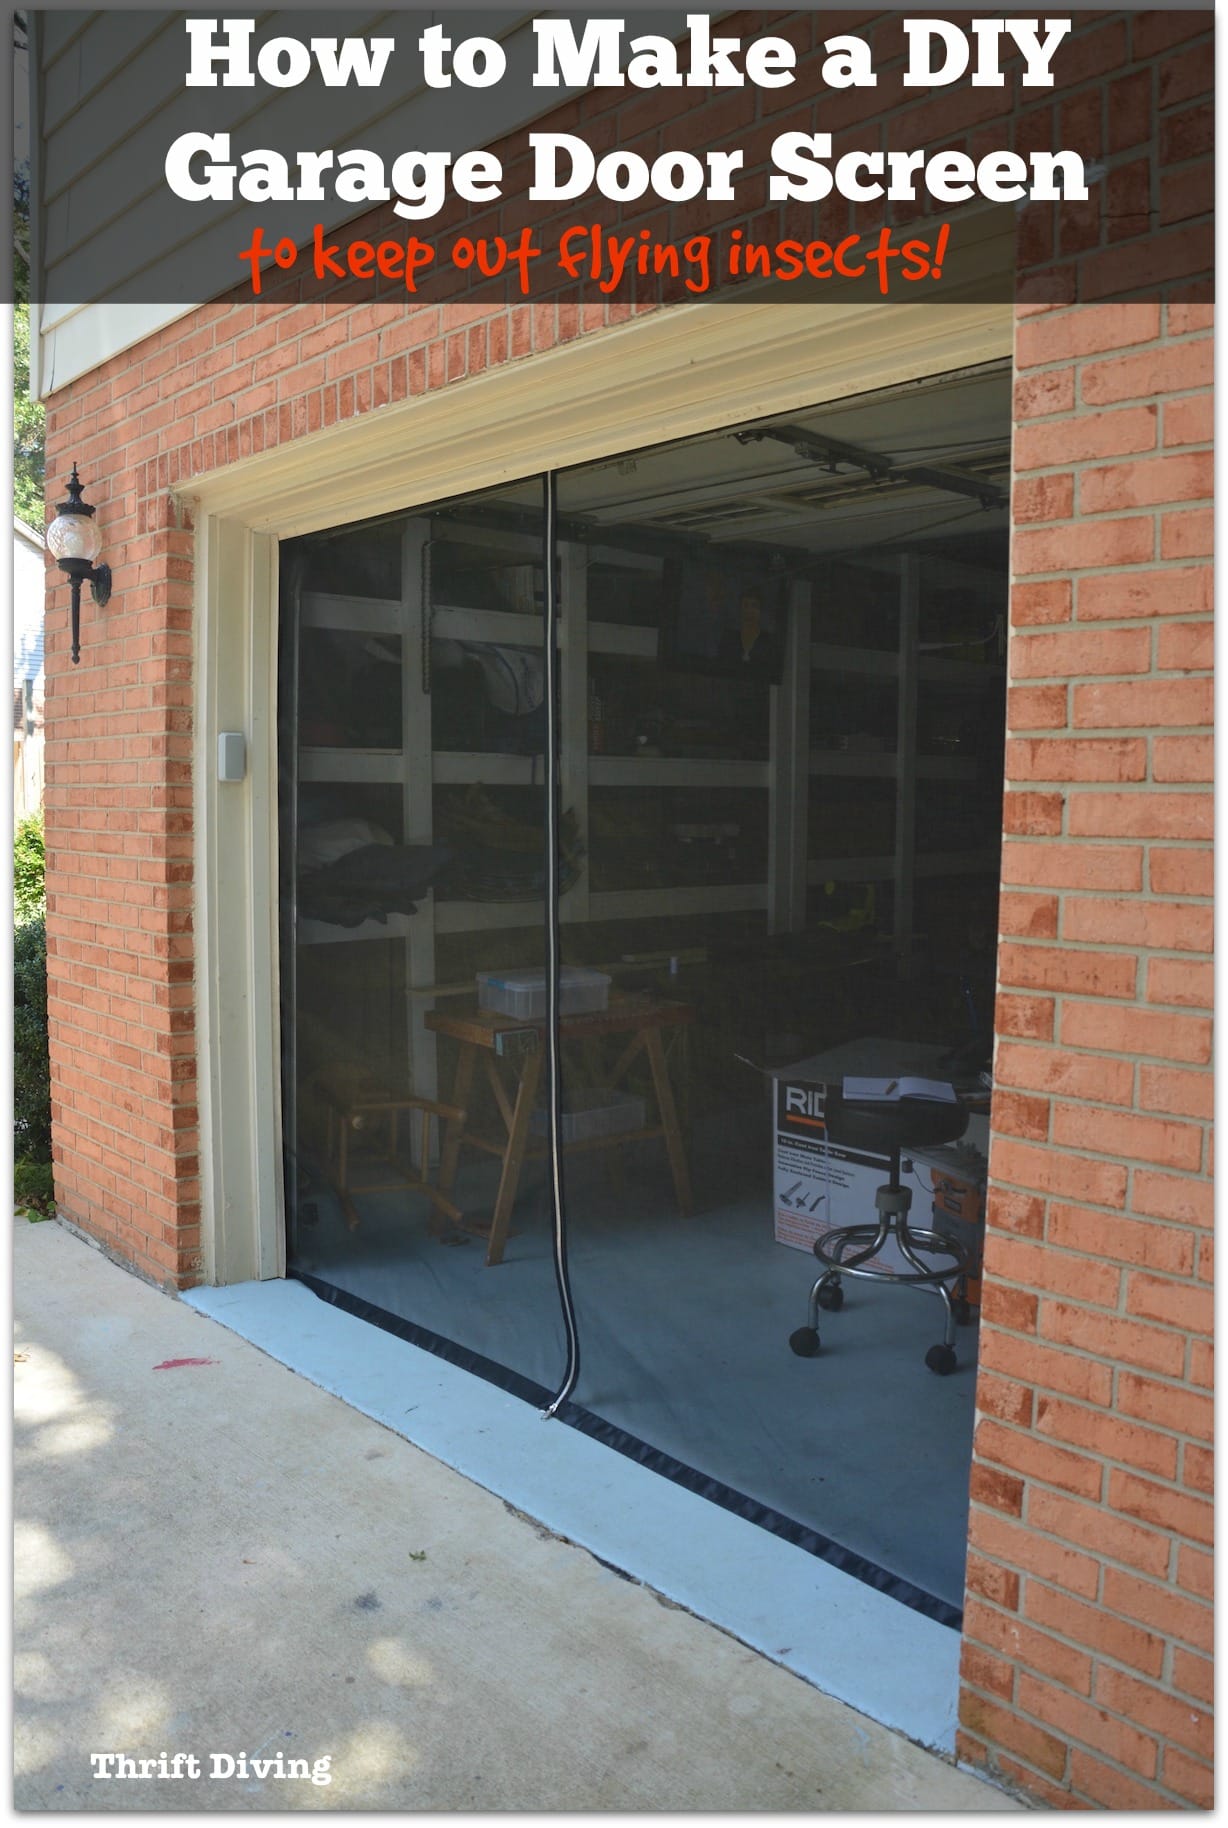 How to Make a Garage Door Screen - keep out flying insects, such as mosquitos, stink bugs, bees, moths, flies, and gnats. - Thrift Diving